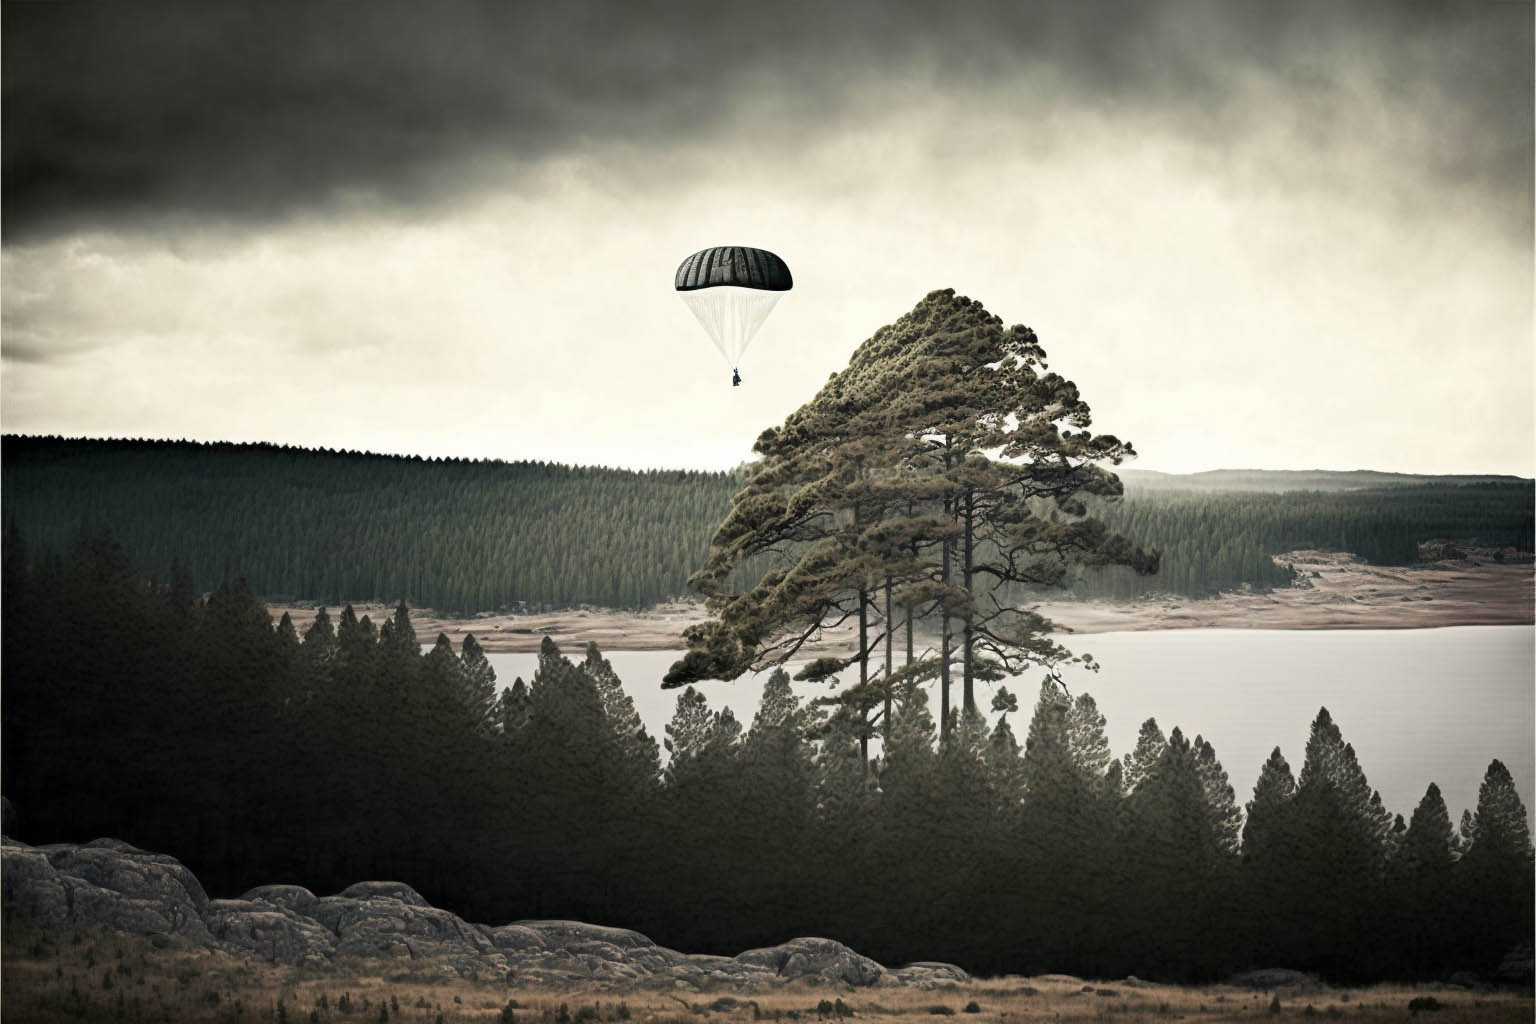 A parashoot drop in the deep forests of Norway.